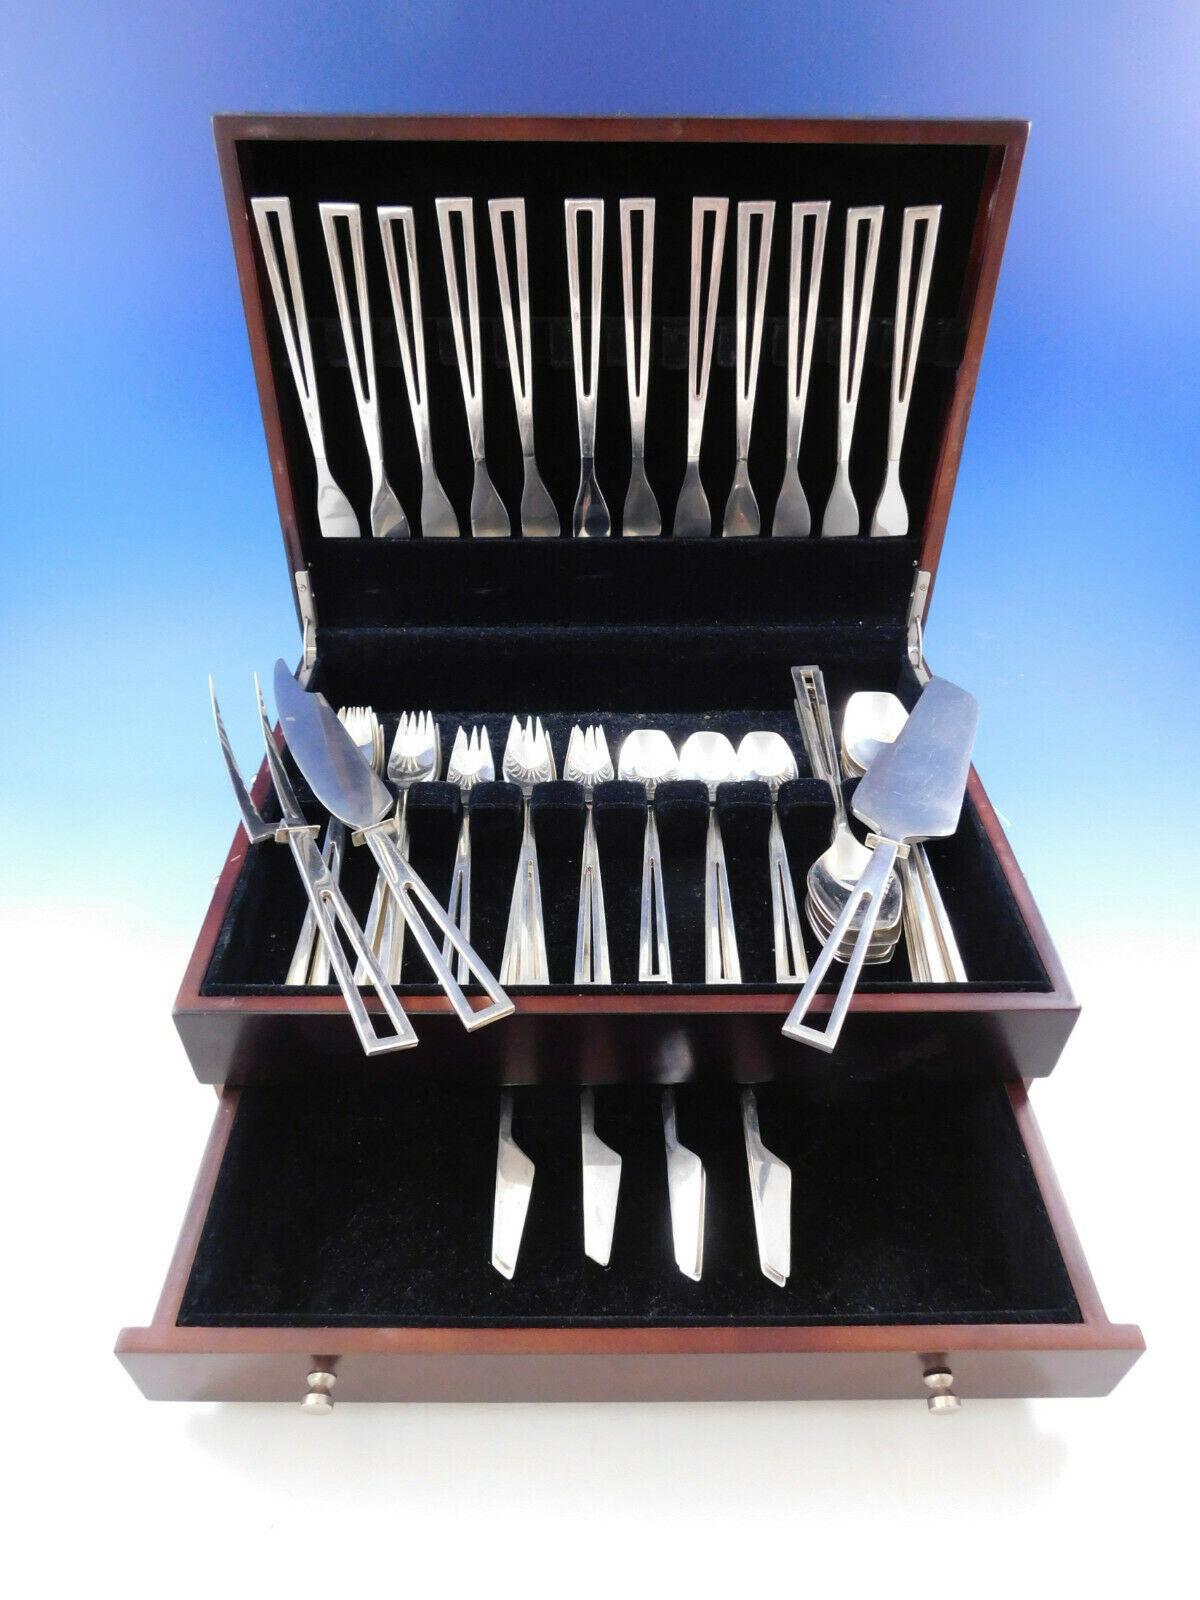 Rare, circa 1955 set of sterling silver flatware by Celsa, of Mexico, in the Avanti pattern. The pattern has a fantastic moderne geometric design with cut-out handles. Celsa had a retail store on 57th street in New York City in the 1950s.

This 75